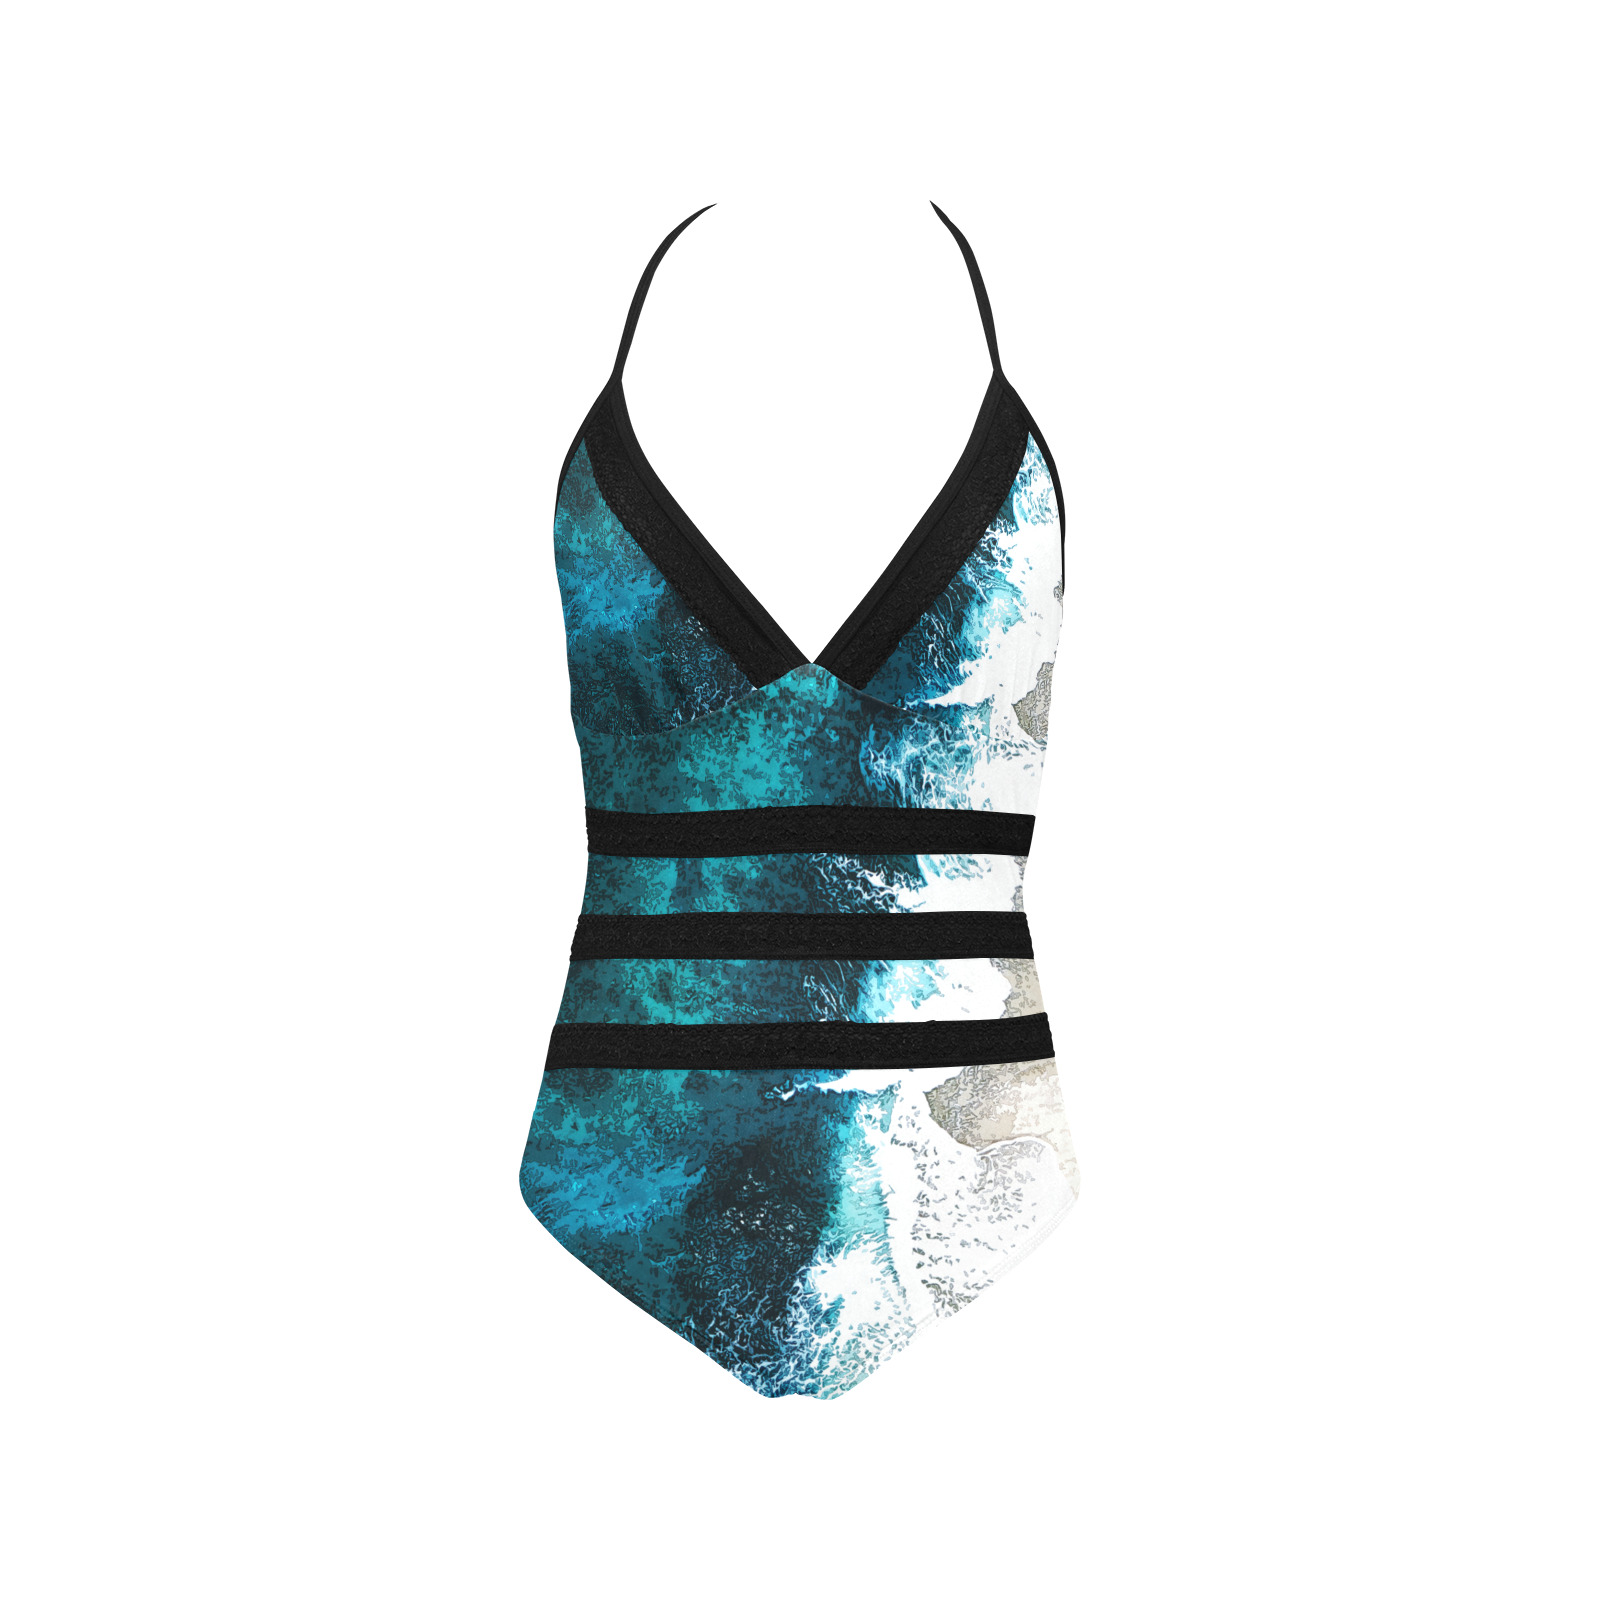 Ocean And Beach Lace Band Embossing Swimsuit (Model S15)